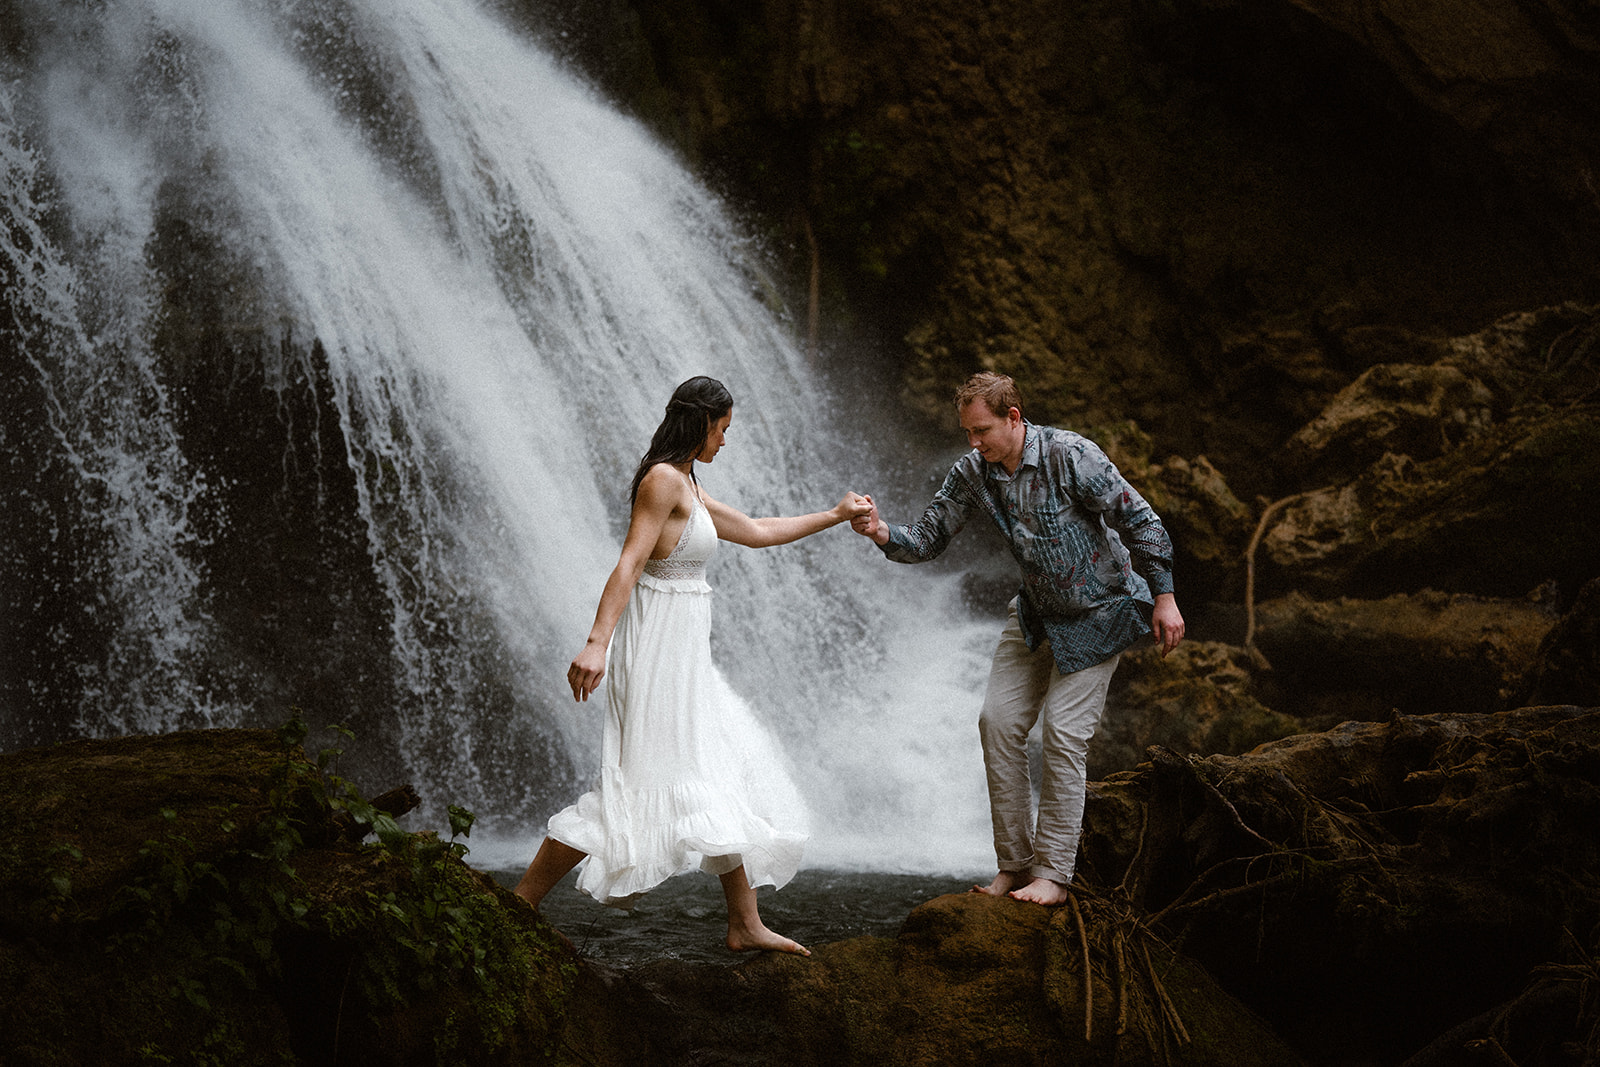 Couple reaching out for each other across a stream, in front of a waterfall, during their pre-wedding photoshoot in Vanuatu